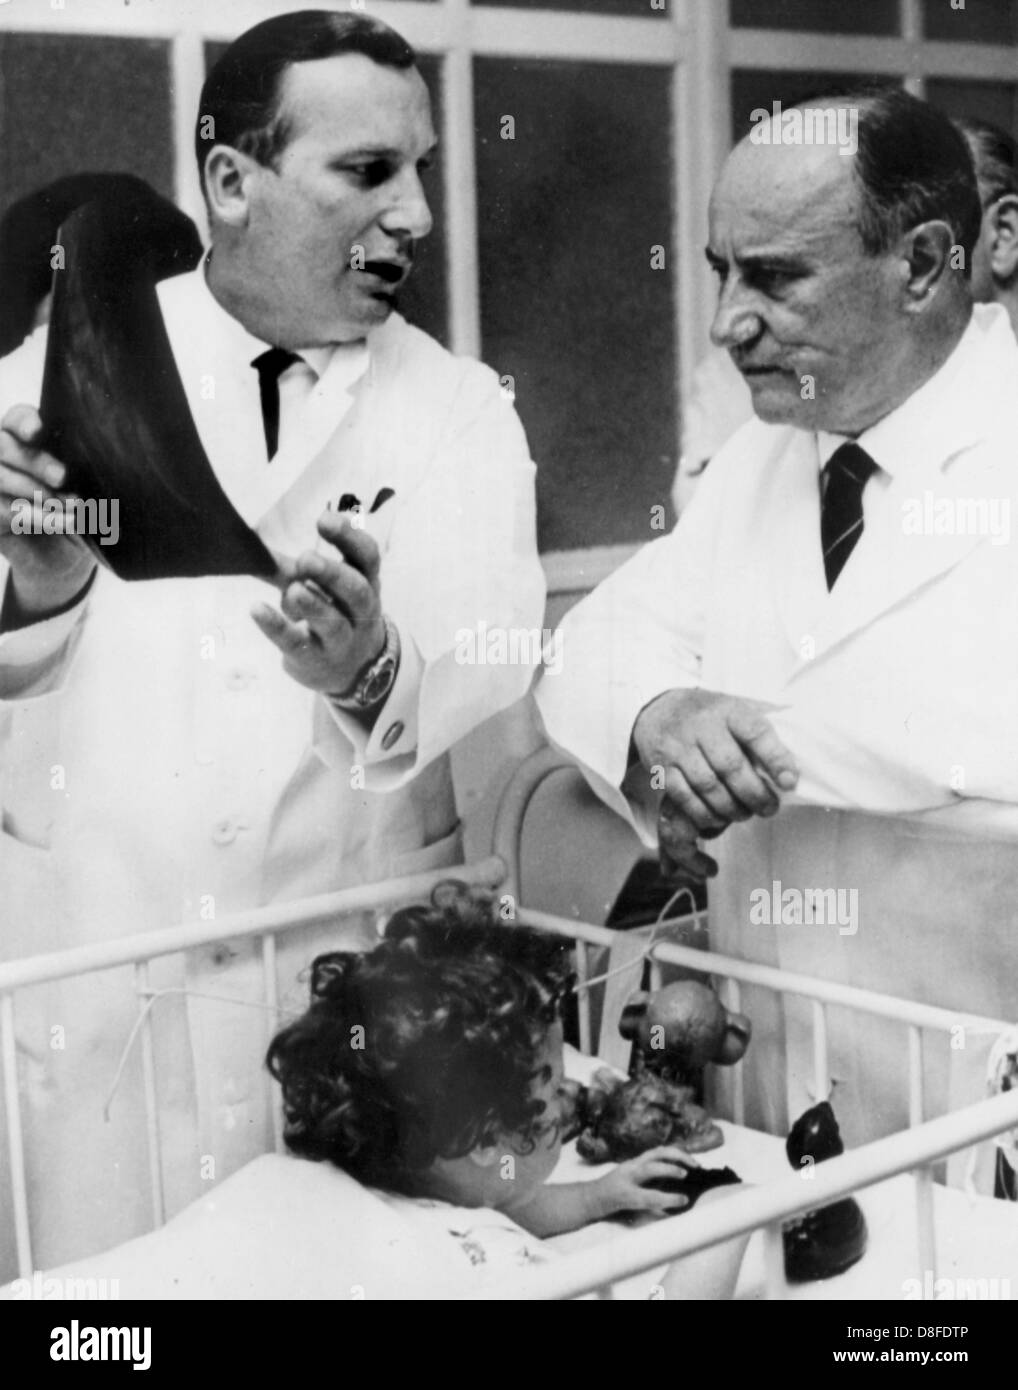 Georg Diederichs (r), prime minister of the German state of Lower Saxony, visits the 'Anna-Stift' hospital in Hanover, Germany, 17 September 1963. The hospital offers therapies for children with severe physical disabilities. In the dysmelia ward, which was opened earlier that year, up to 30 Contergan affected children are treated as inpatients. On the left the hospital's head physician, Professor Dr. Gustav Hauberg, can be seen. Stock Photo